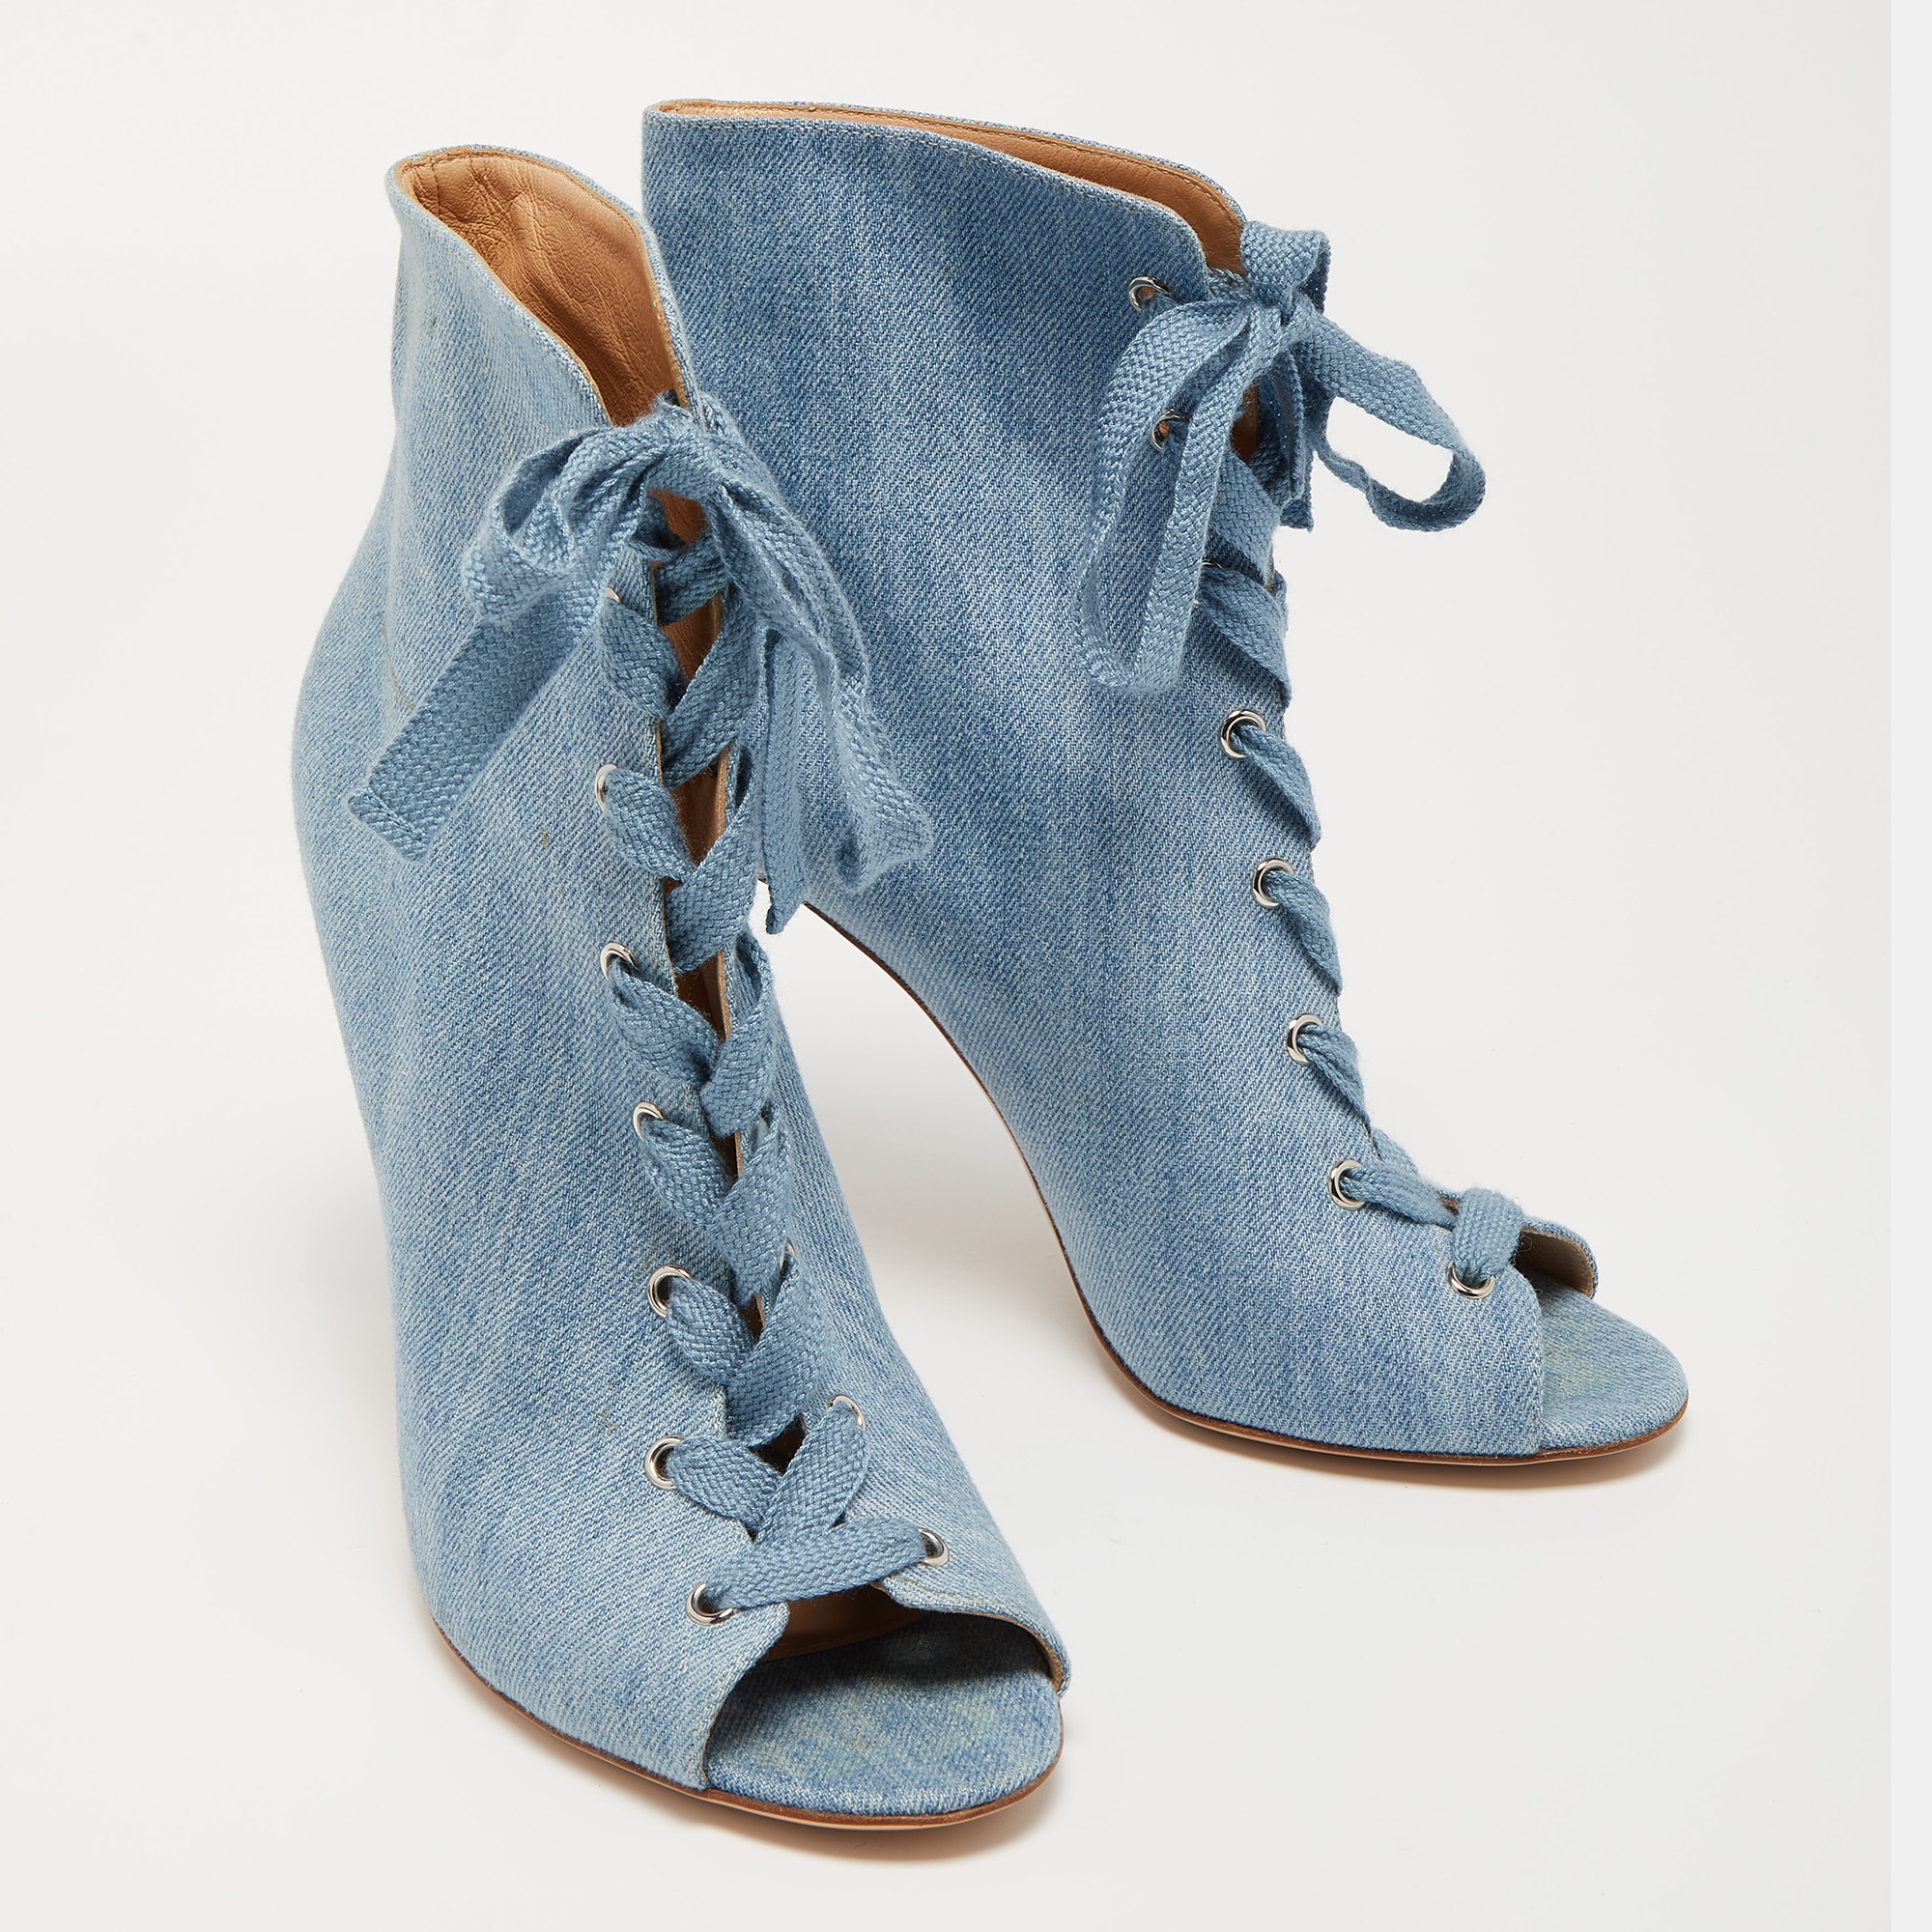 Gianvito Rossi Blue Denim Open Toe Lace Up Boots Size 41